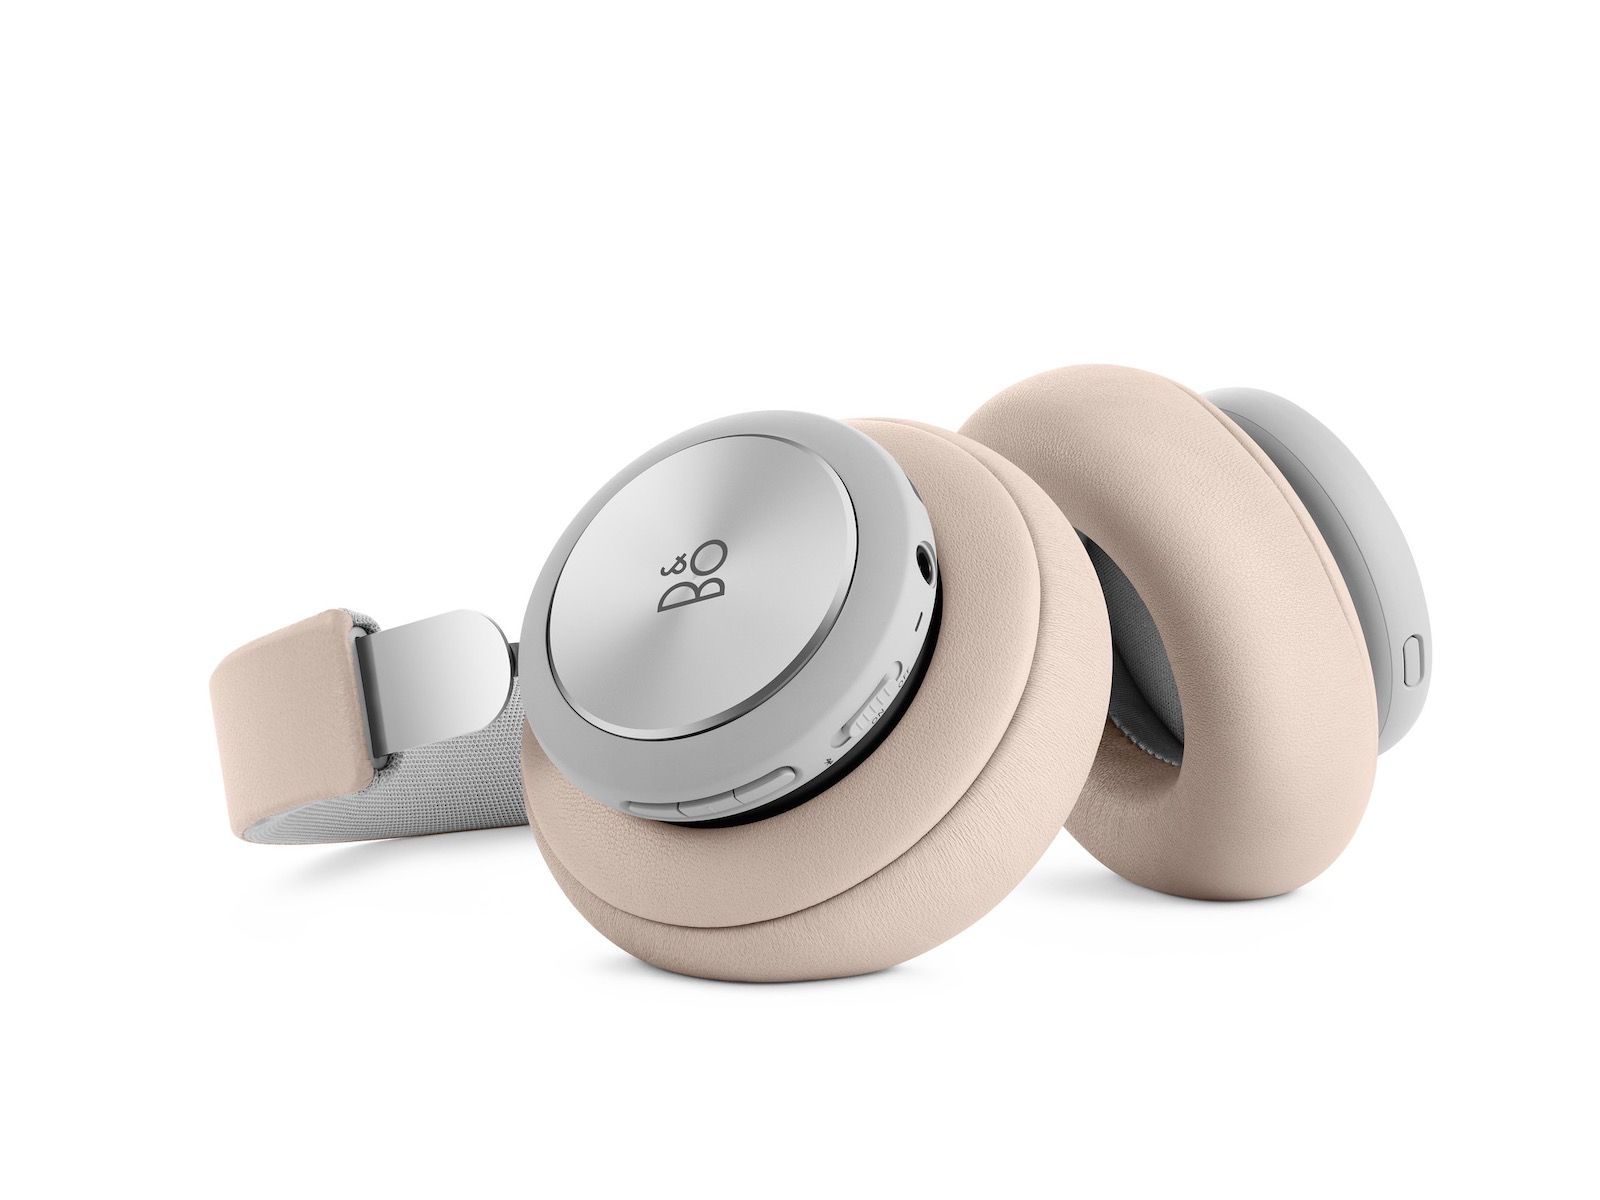 BO BeoPlay H4 announced with image 1